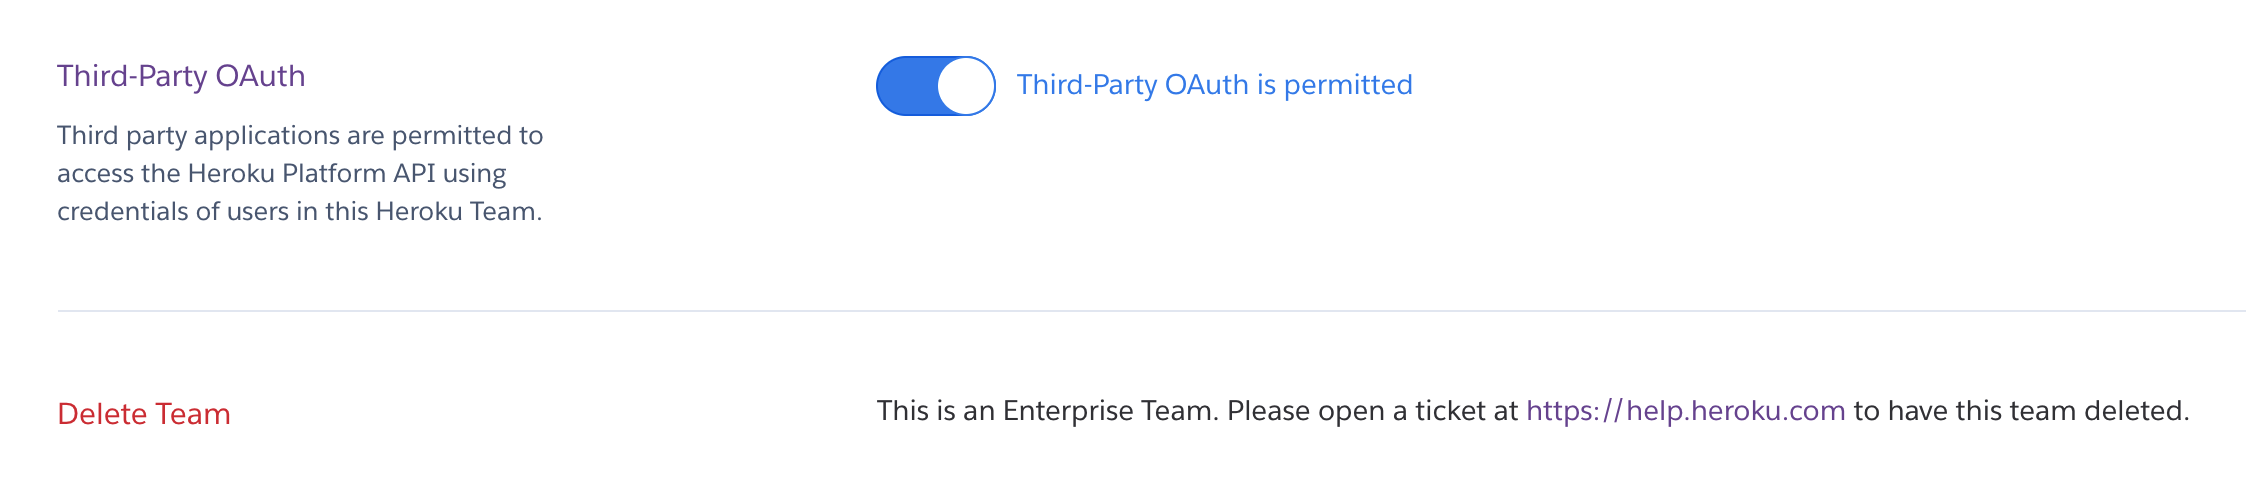 Limiting access to apps via OAuth